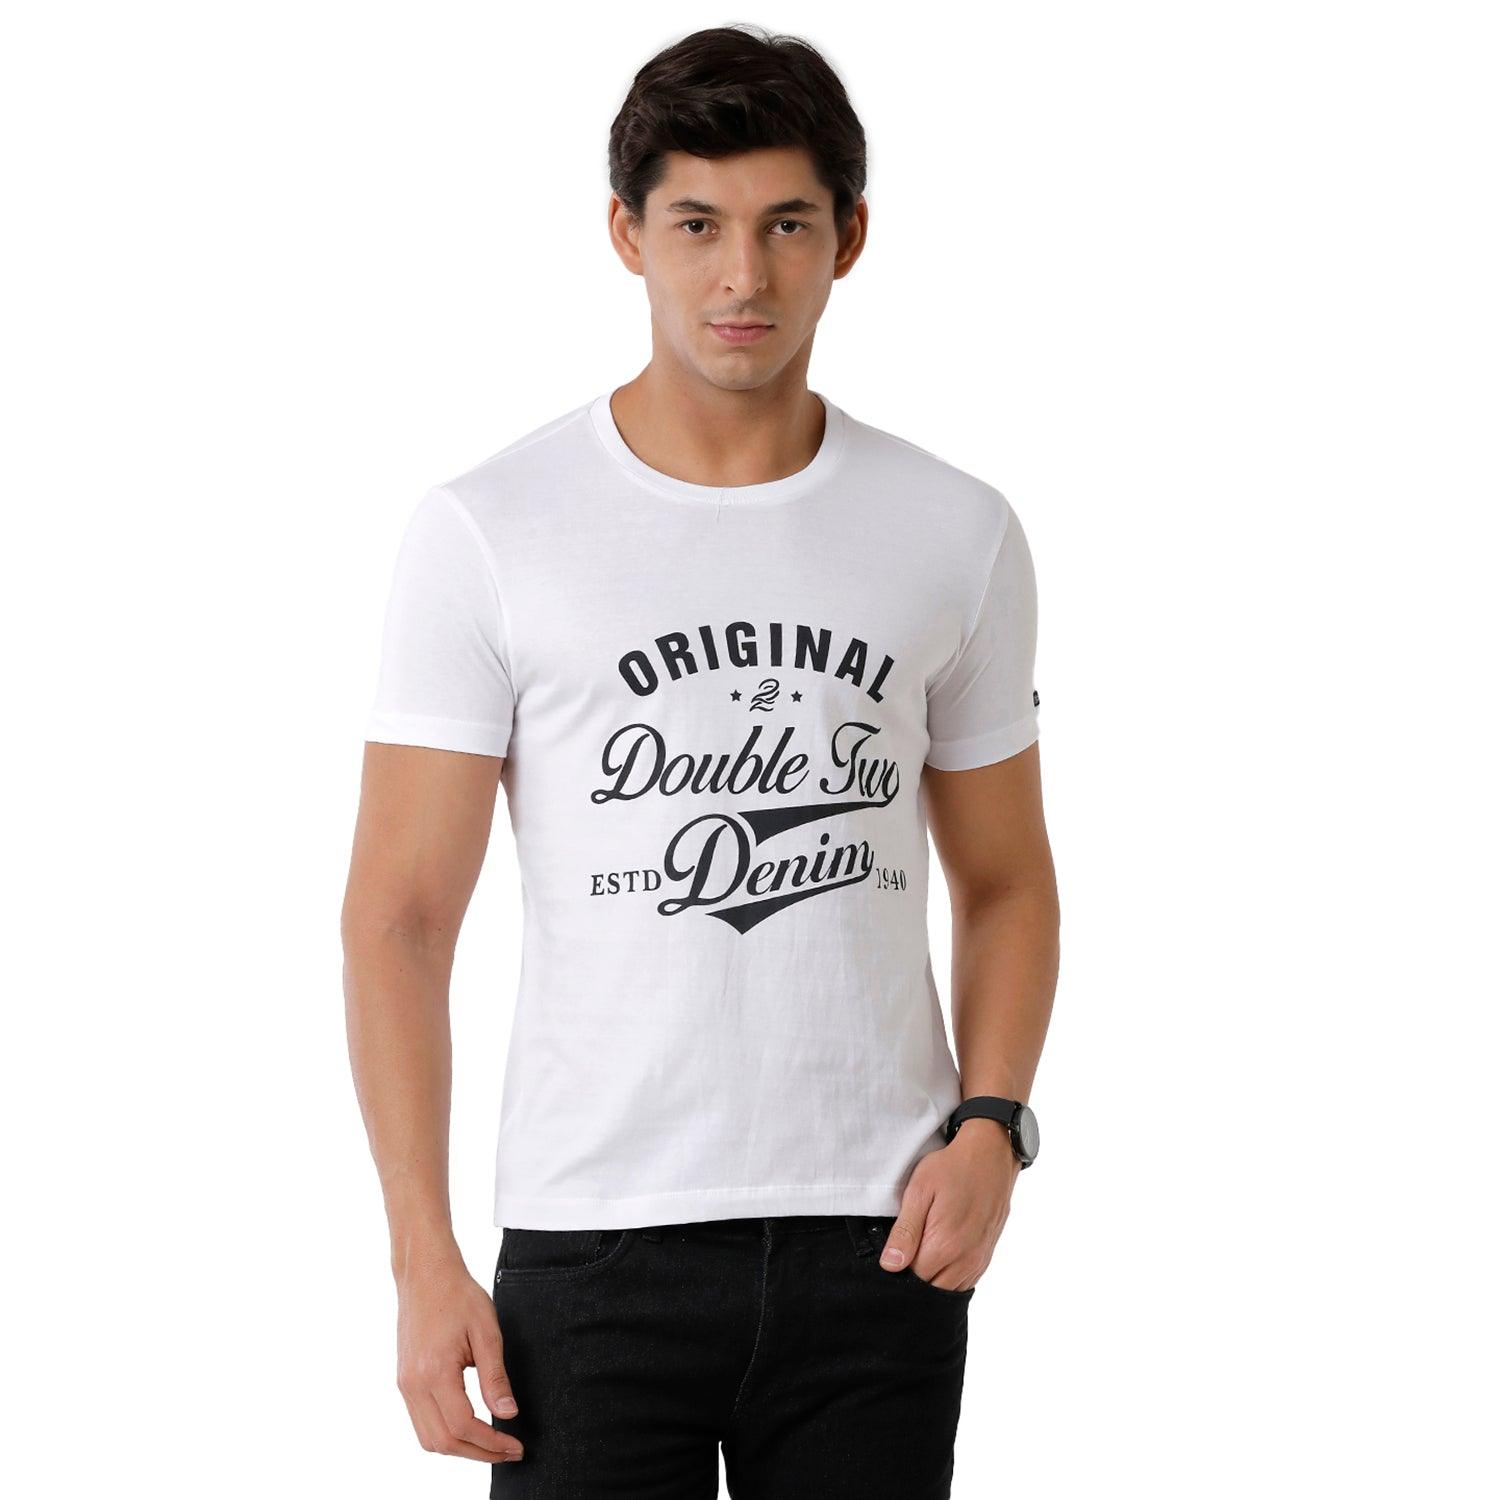 Double Two Printed Crew Neck White T-Shirt